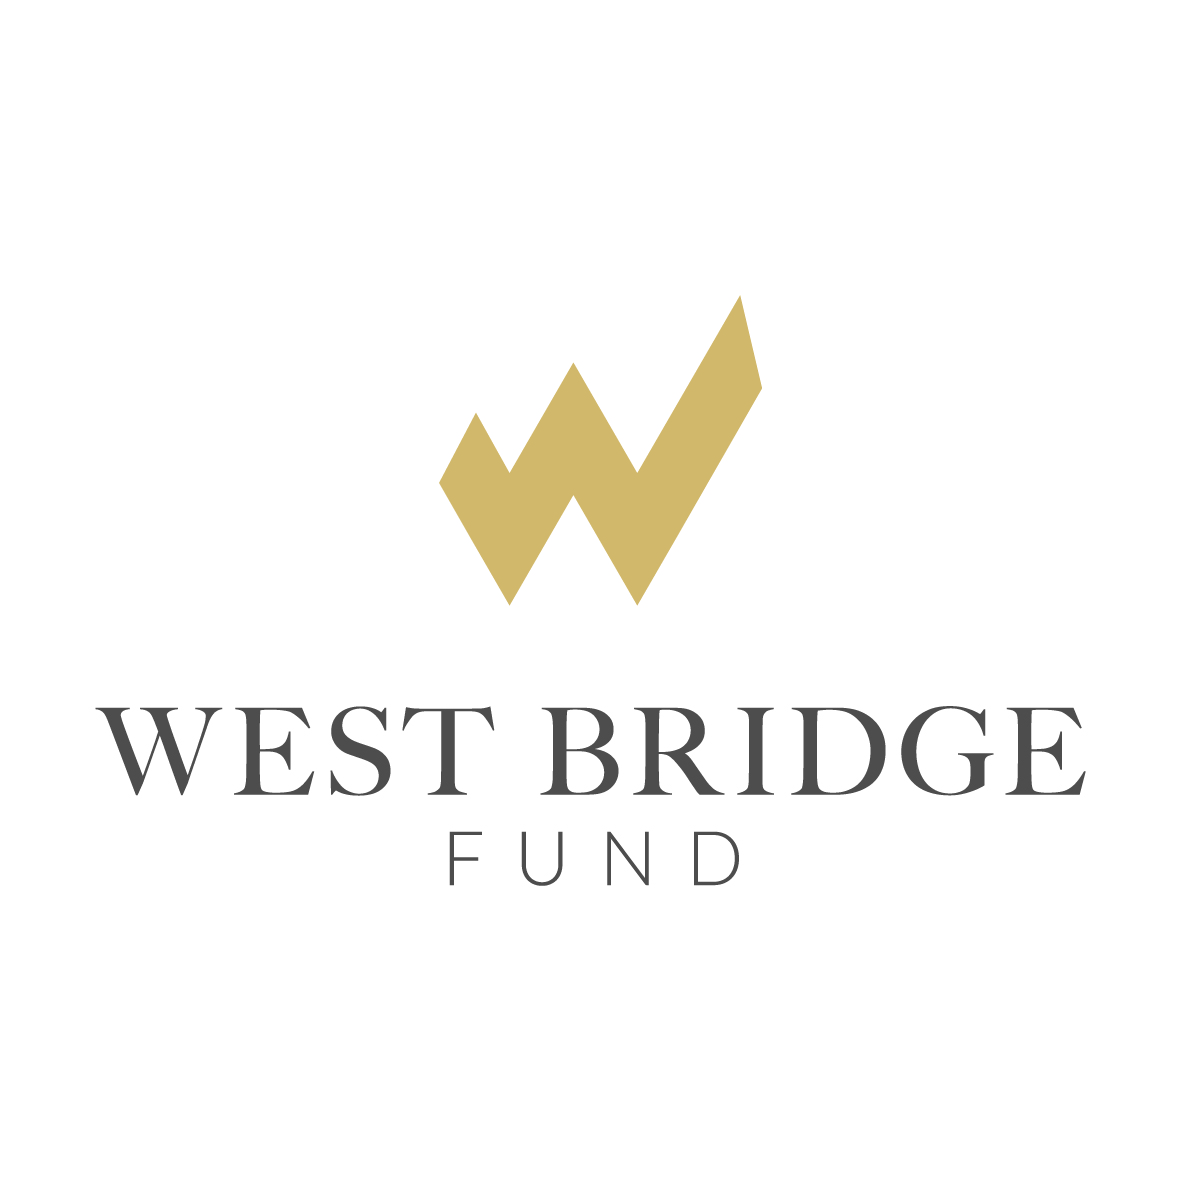 West Bridge Fund logo design by logo designer Ferenc & Farkas for your inspiration and for the worlds largest logo competition